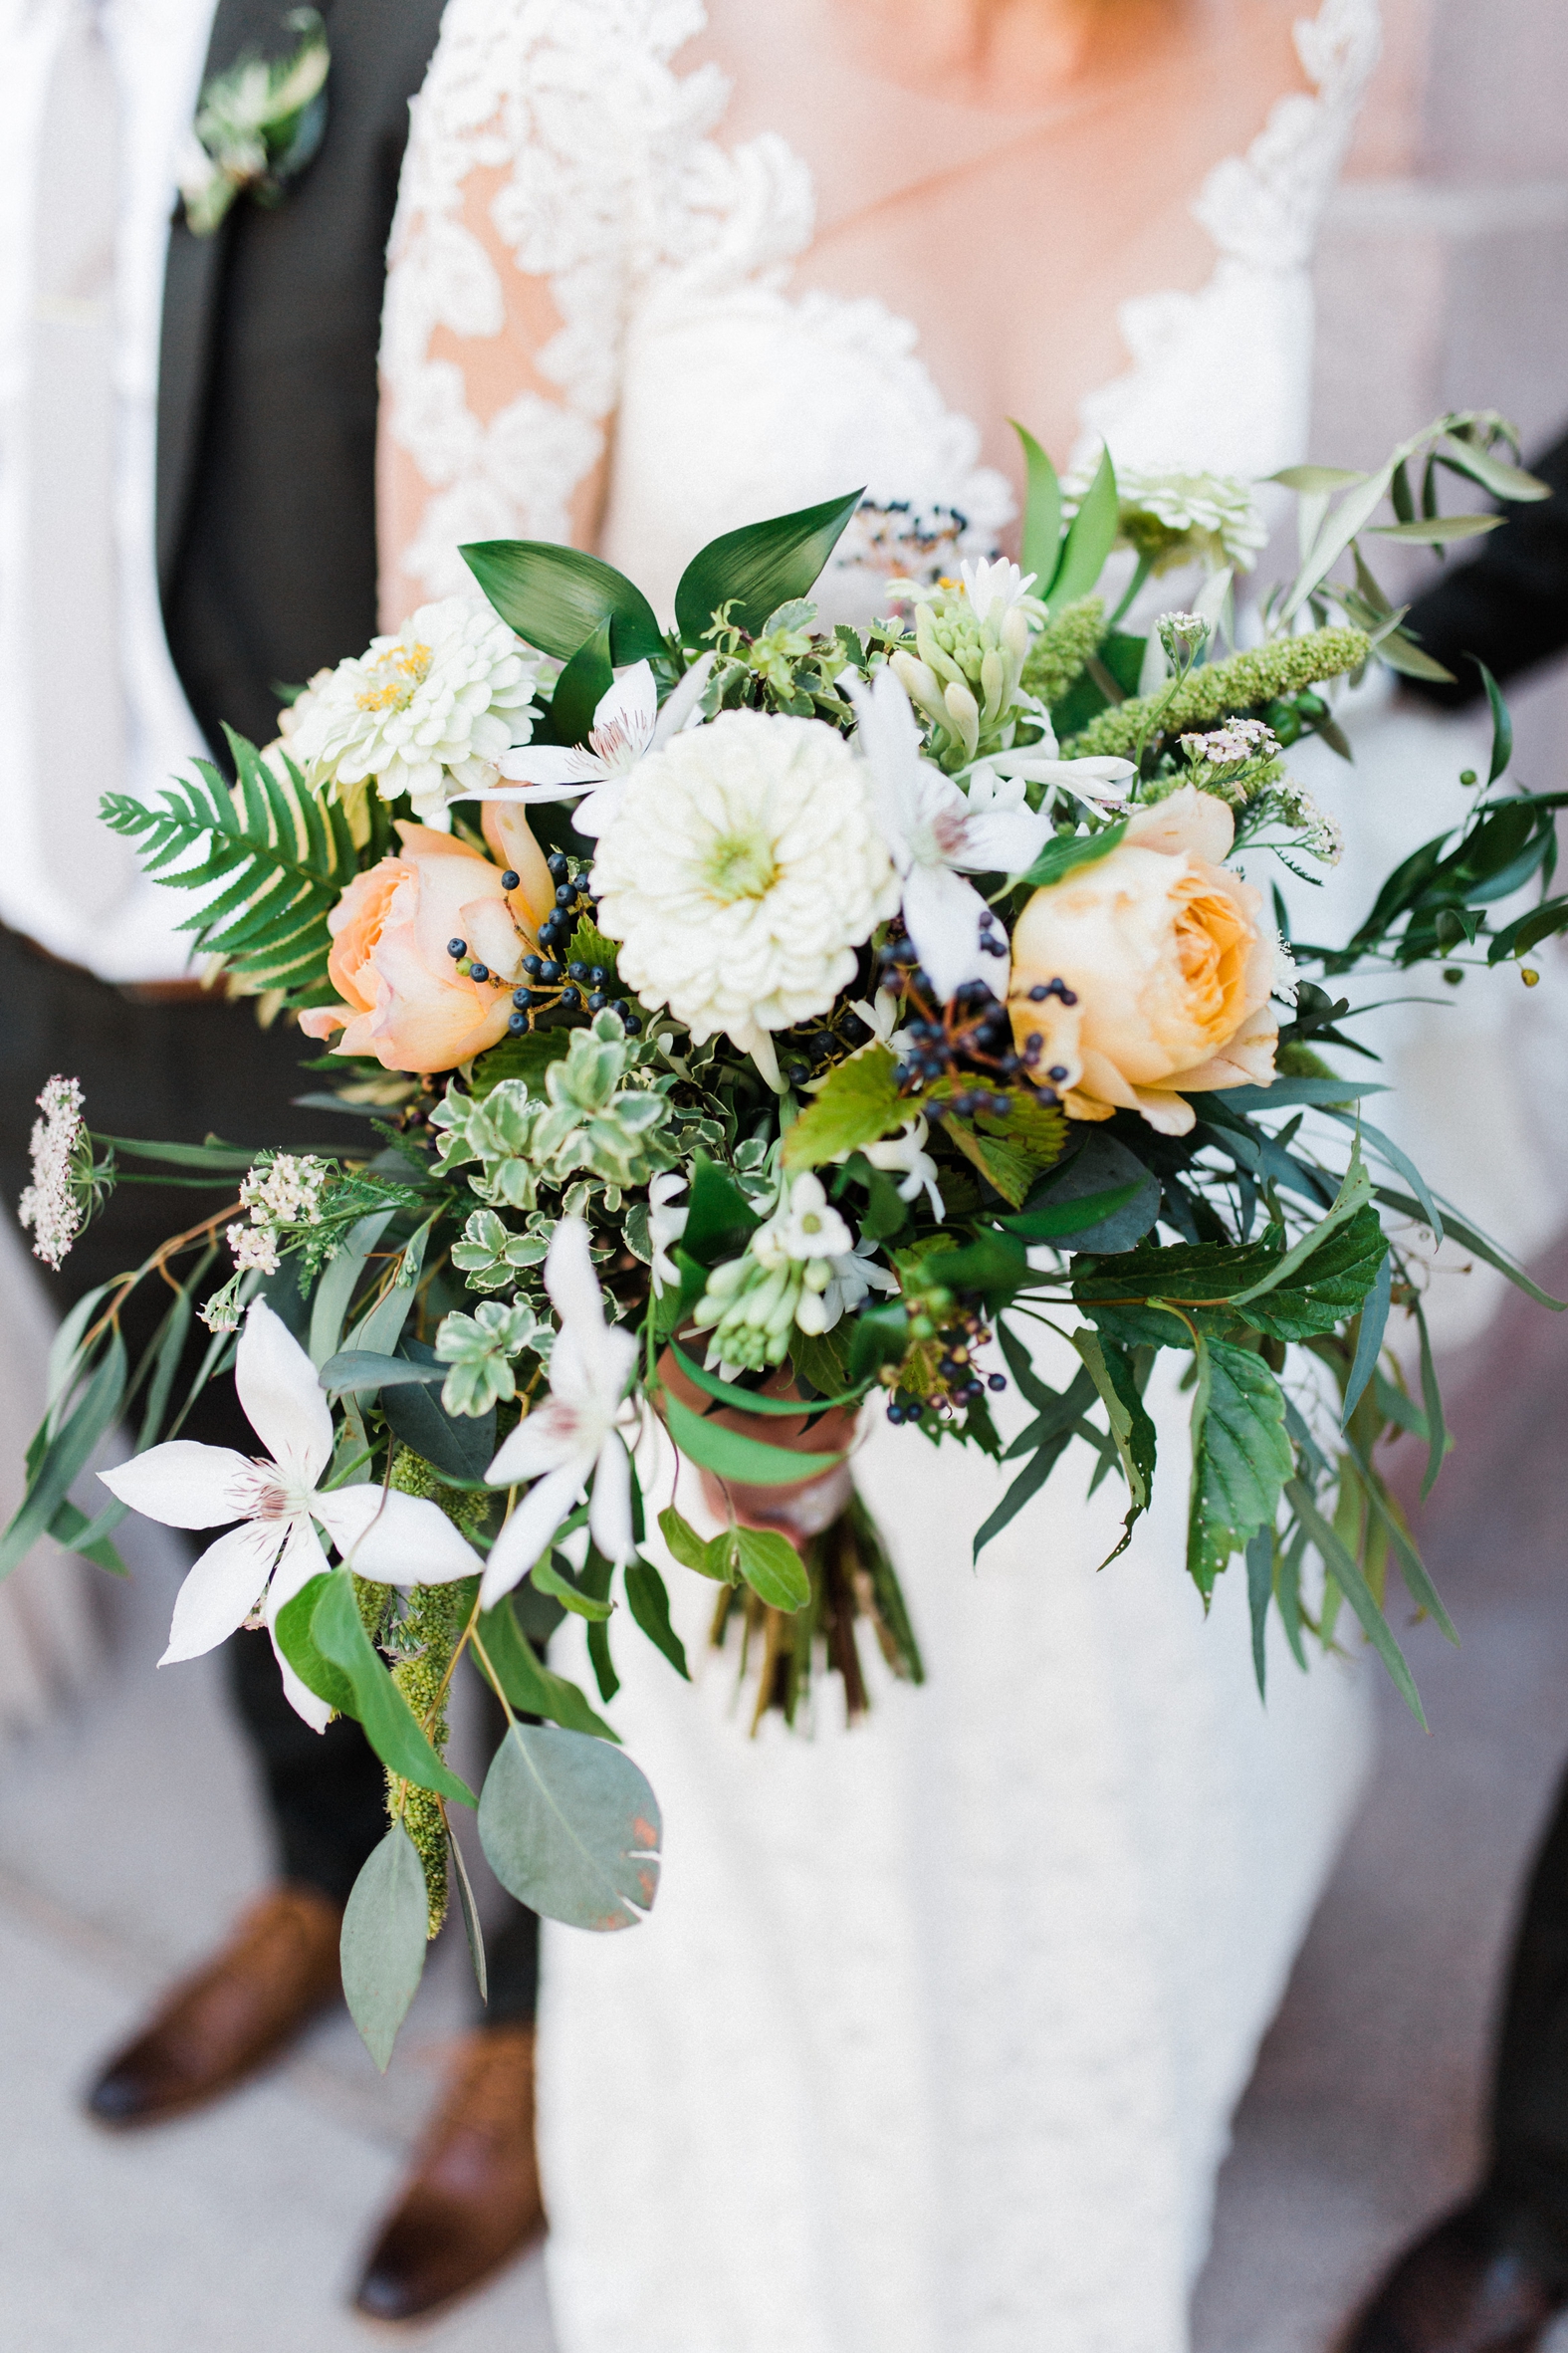 Bridal bouquet with white, ivory, peach roses, daisies, greenery, eucalyptus. Held by bride in lace wedding dress.